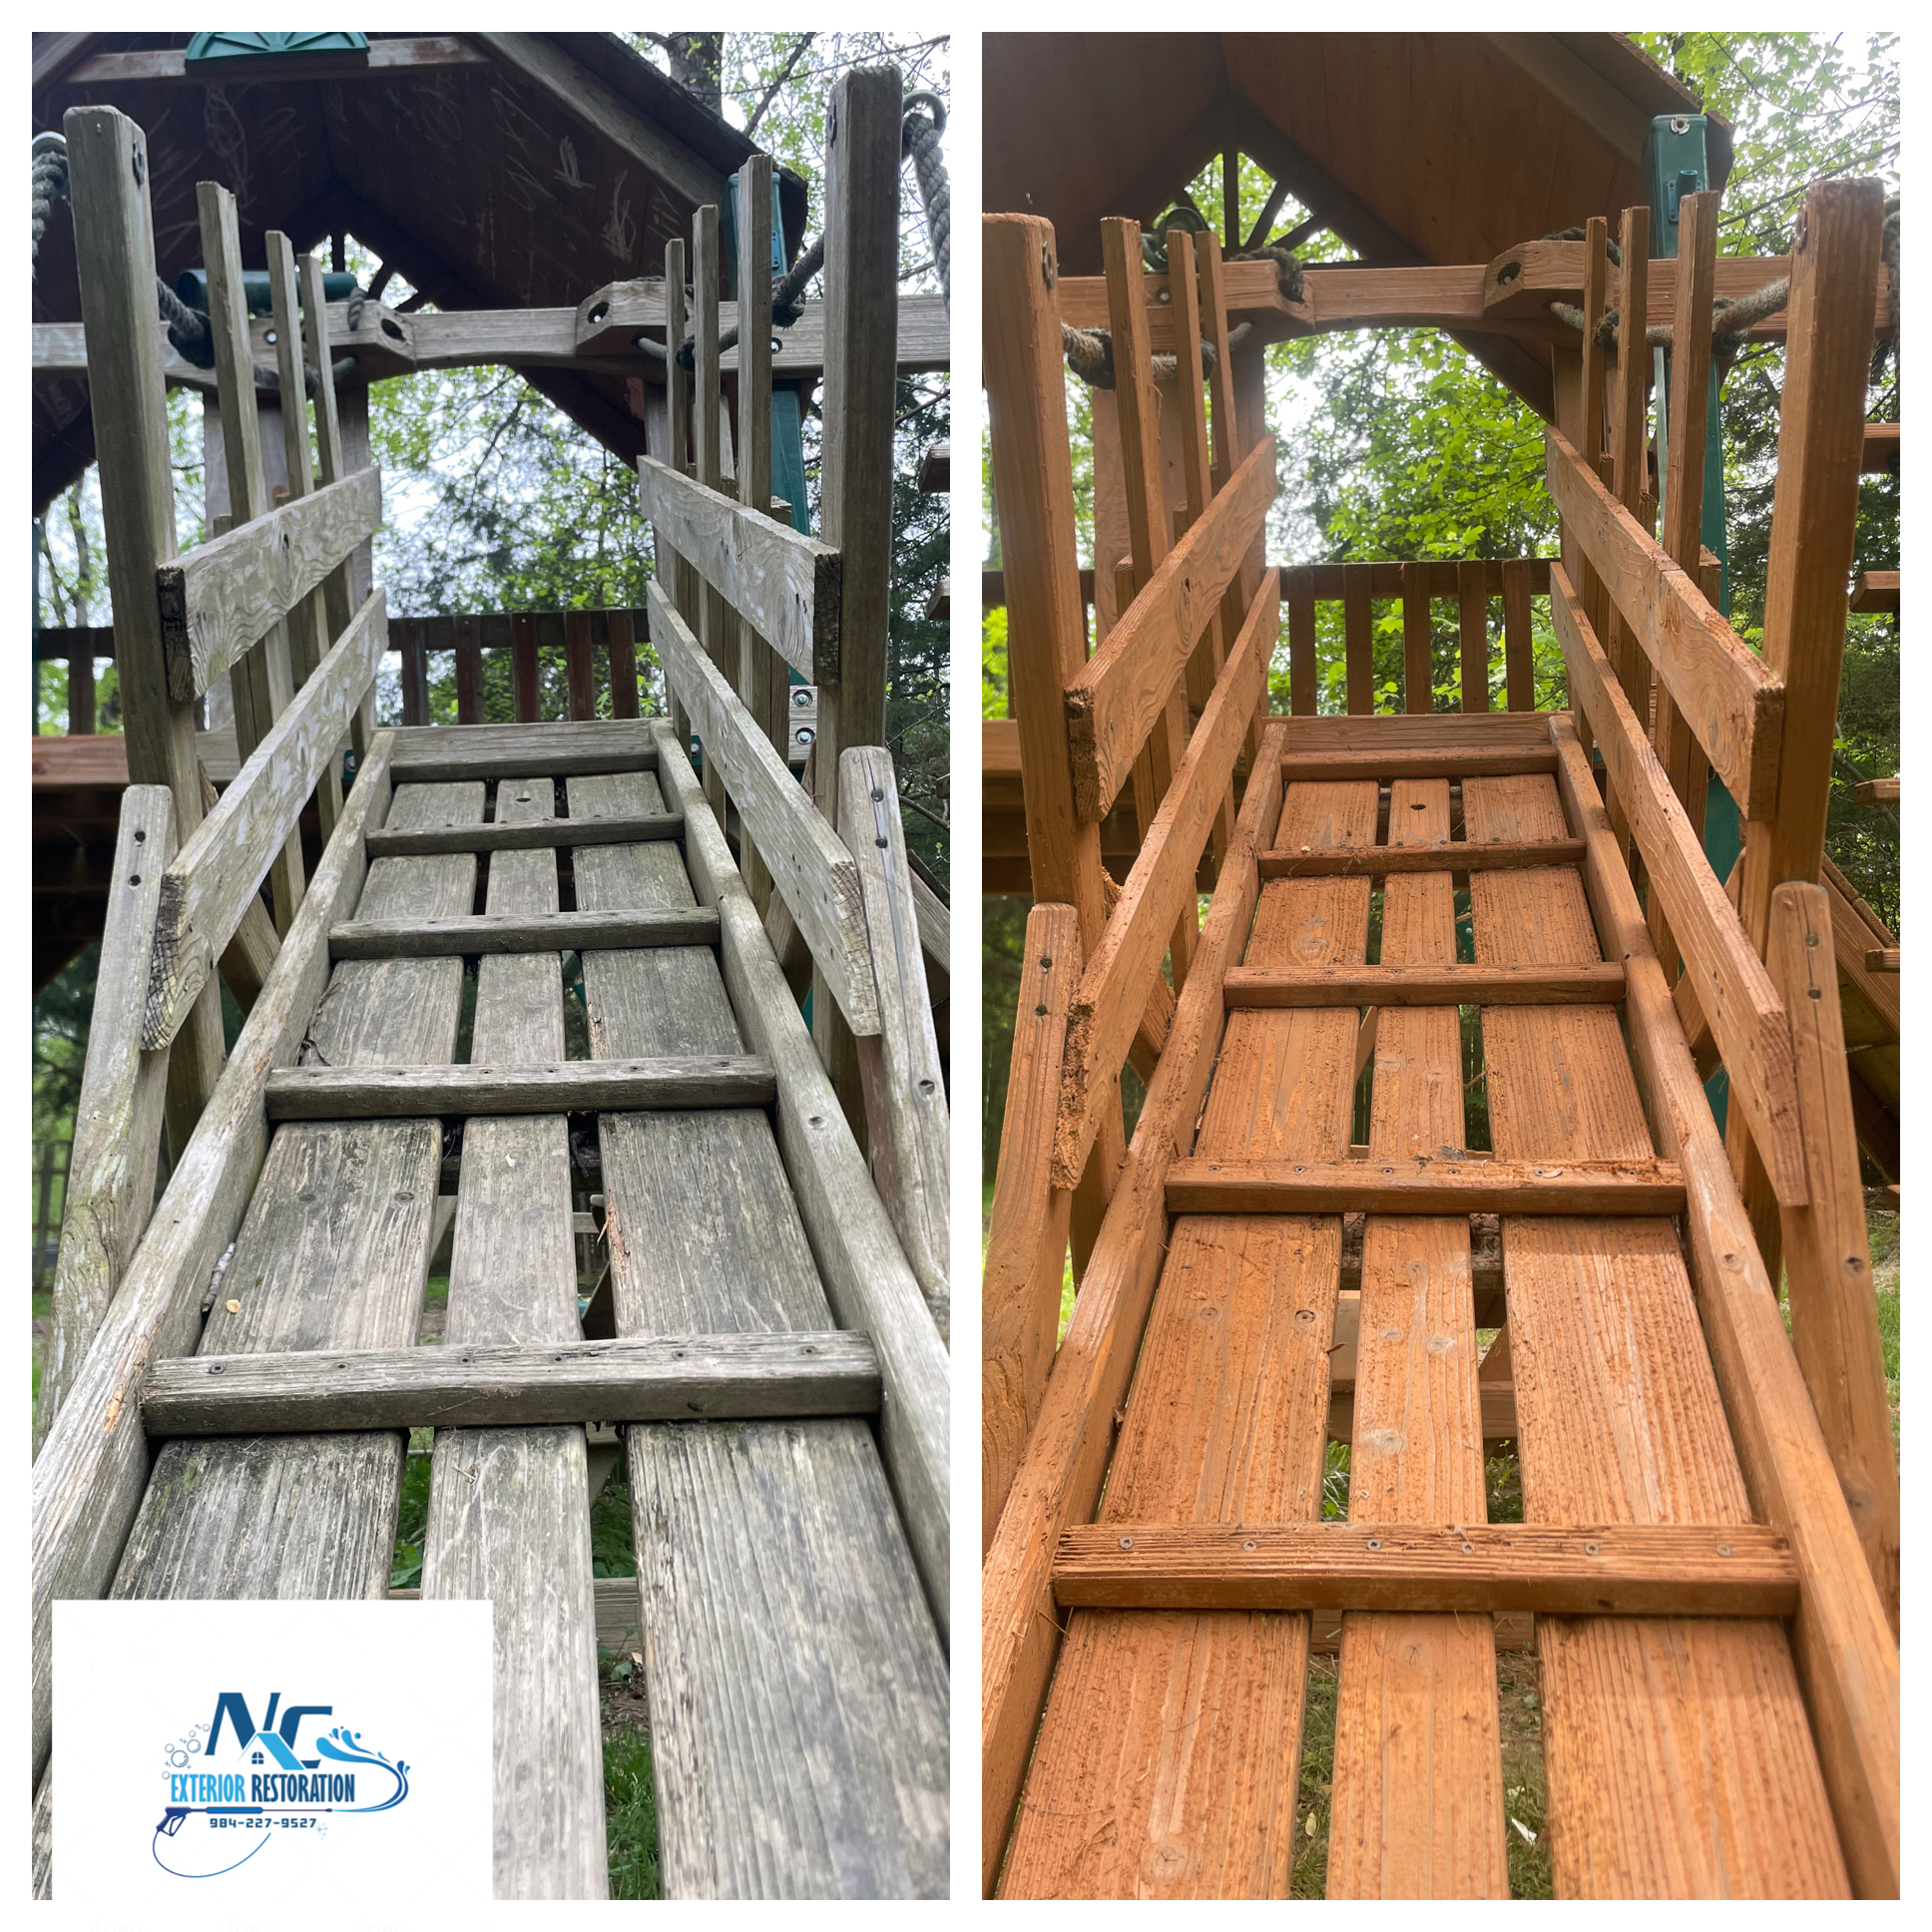 Top Quality Pressure Wash and Staining of a Play-Set